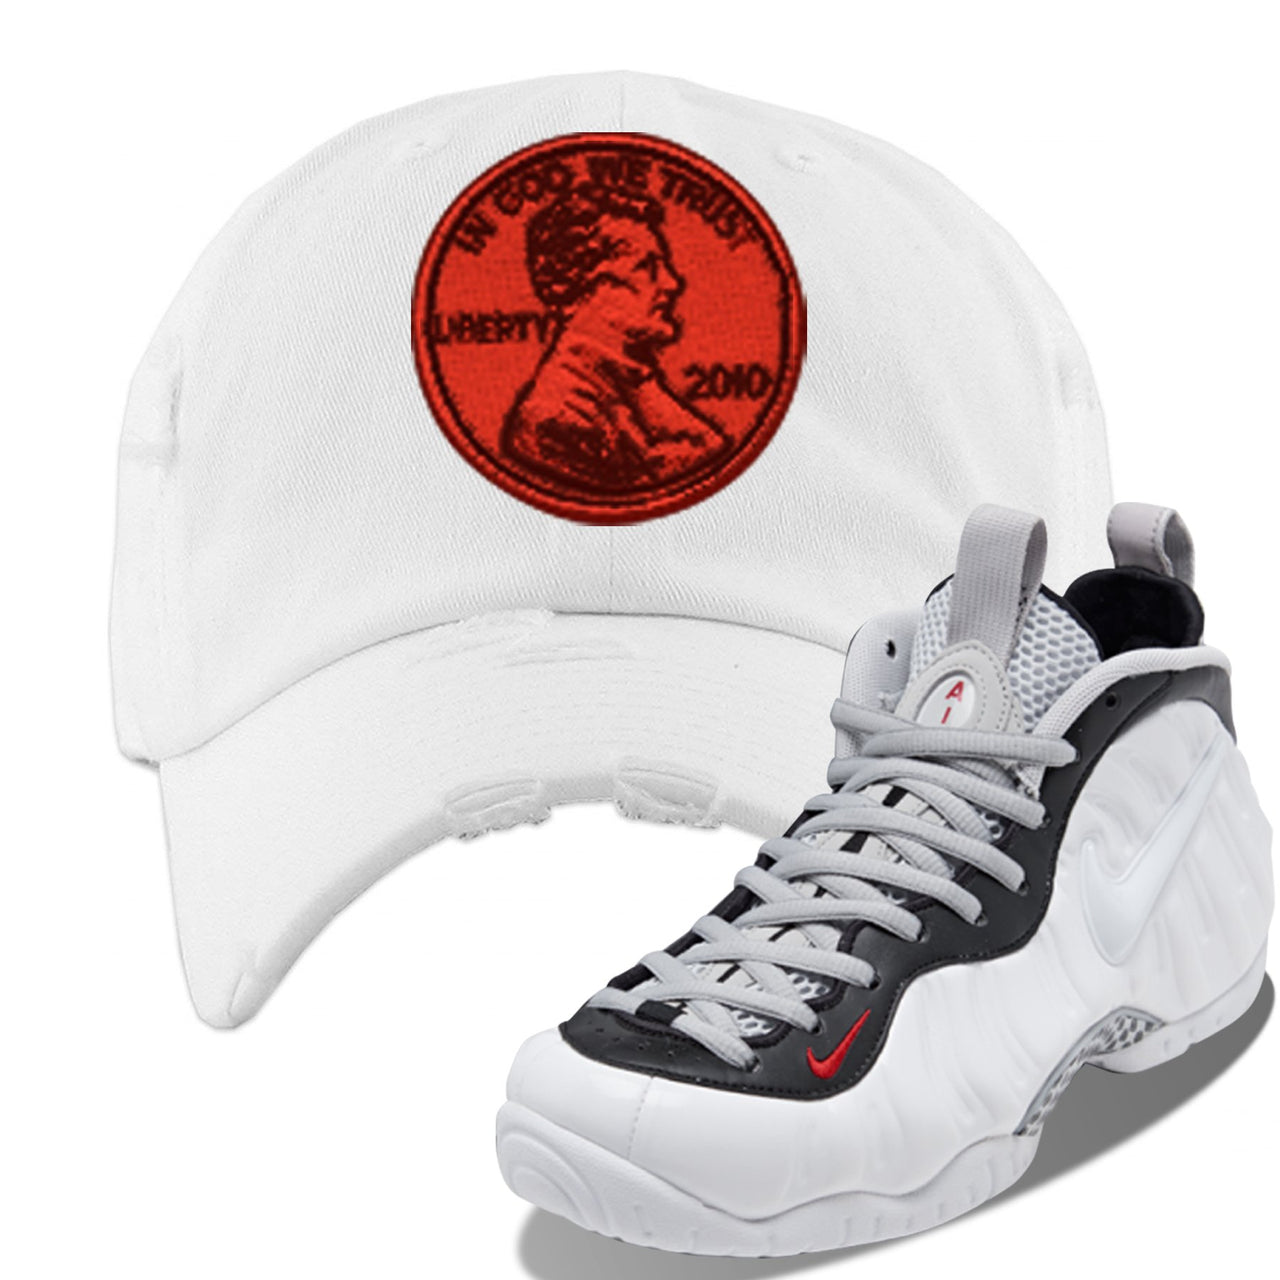 Foamposite Pro White Black University Red Sneaker White Distressed Dad Hat | Hat to match Nike Air Foamposite Pro White Black University Red Shoes | Penny